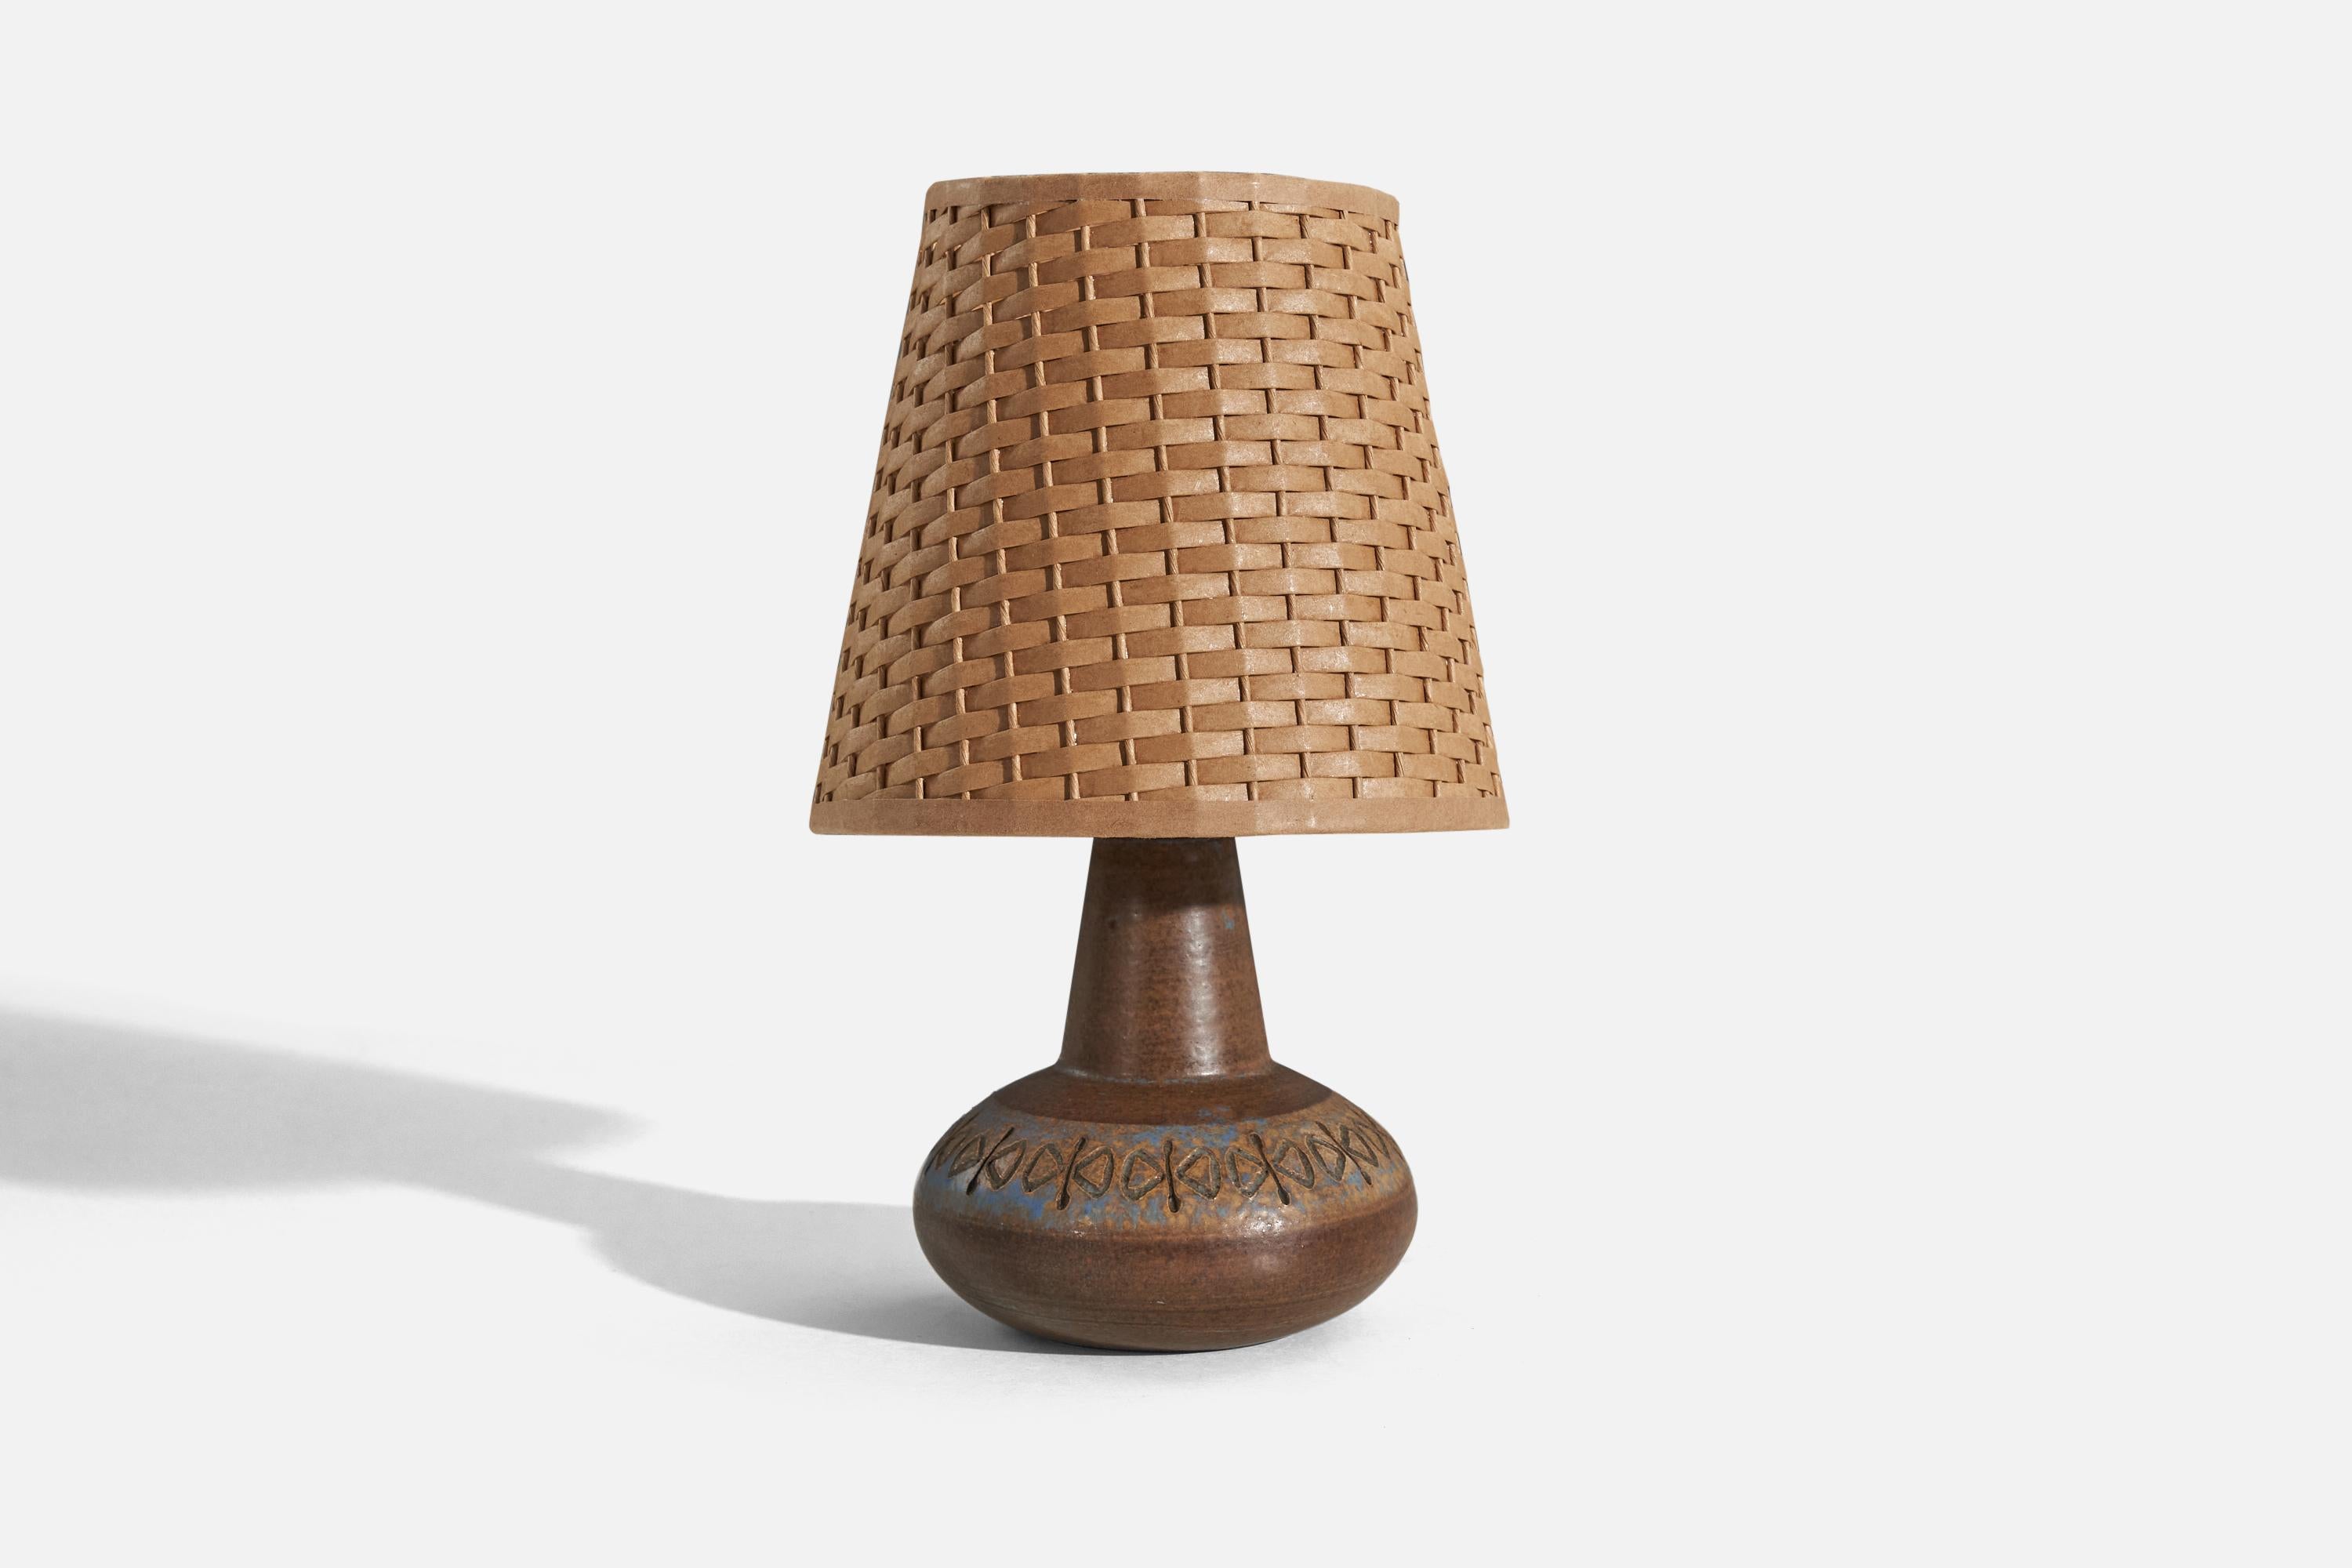 A brown, glazed and incised stoneware table lamp designed by Ulla Winbladh and produced by Alingsås Keramik, Sweden, c. 1950s.

Sold without lampshade. 
Dimensions of Lamp (inches) : 6.75 x 4.375 x 4.375 (H x W x D)
Dimensions of Shade (inches)